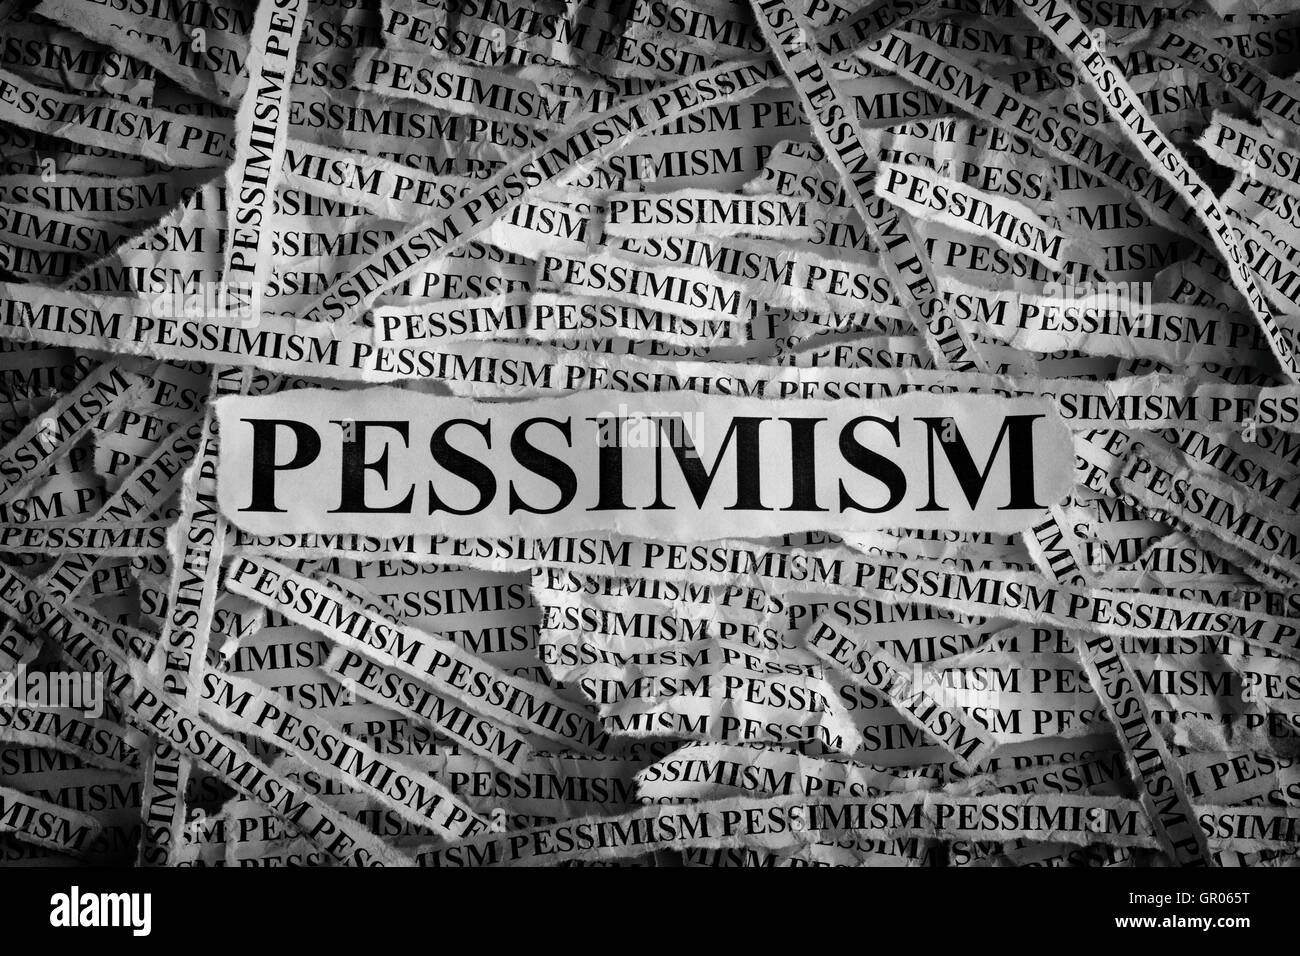 Pessimism. Torn pieces of paper with the word Pessimism. Concept Image. Black and White. Closeup. Stock Photo